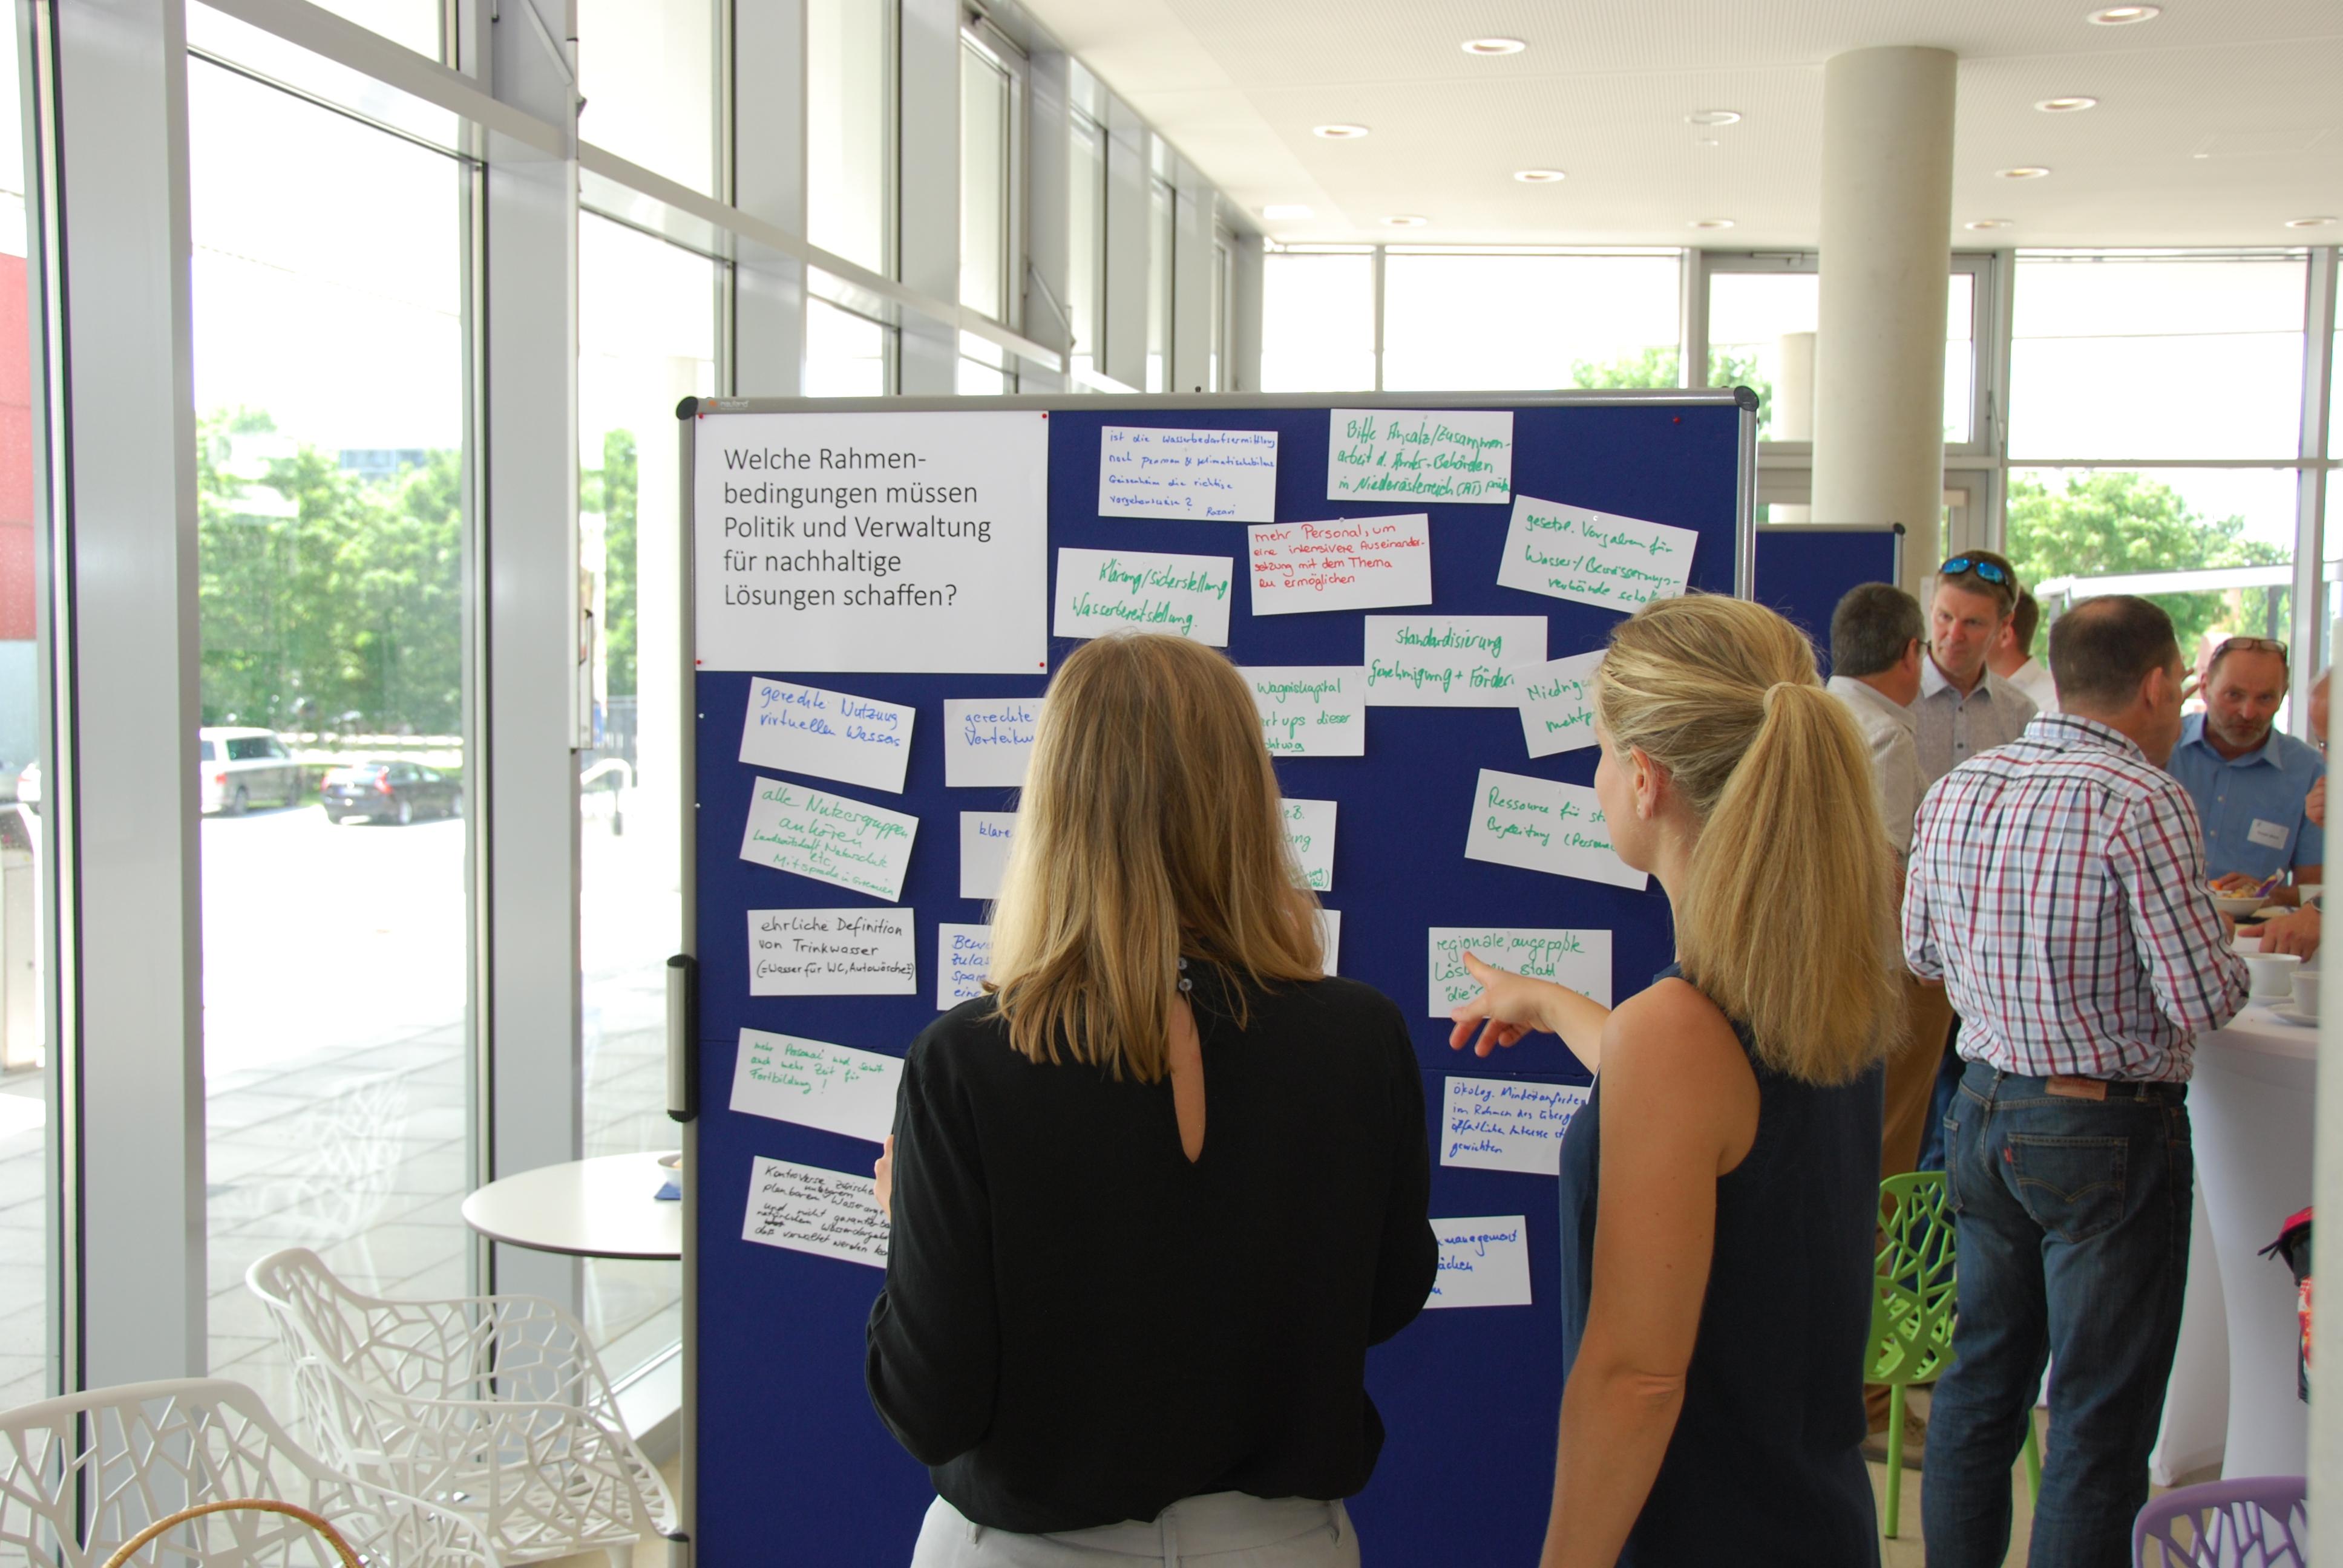 Two female participants in front of a pin-board with a collection of ideas for sustainable water management.